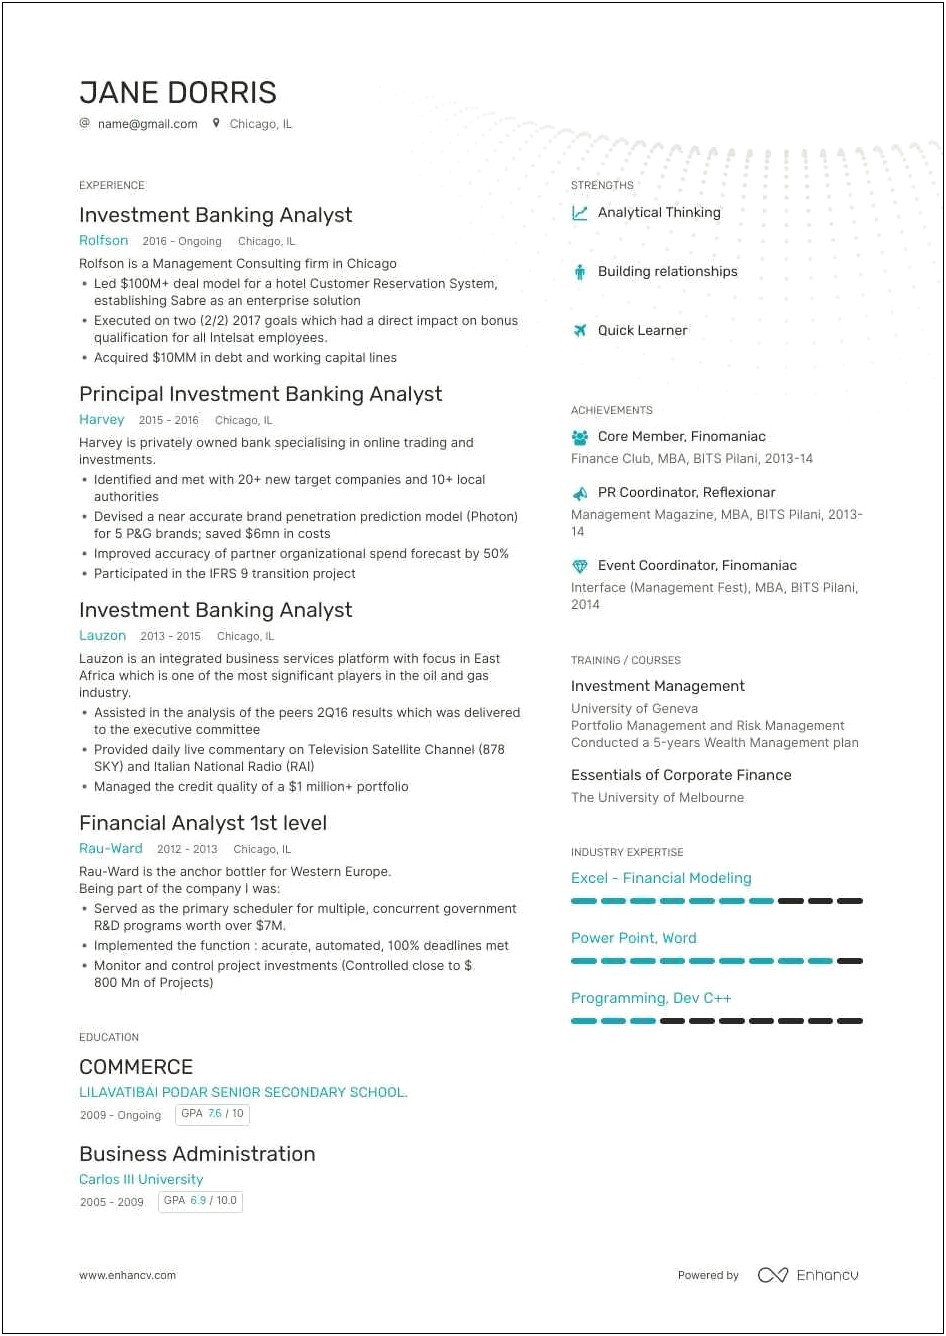 Intern Experience Investment Banking Resume Entry